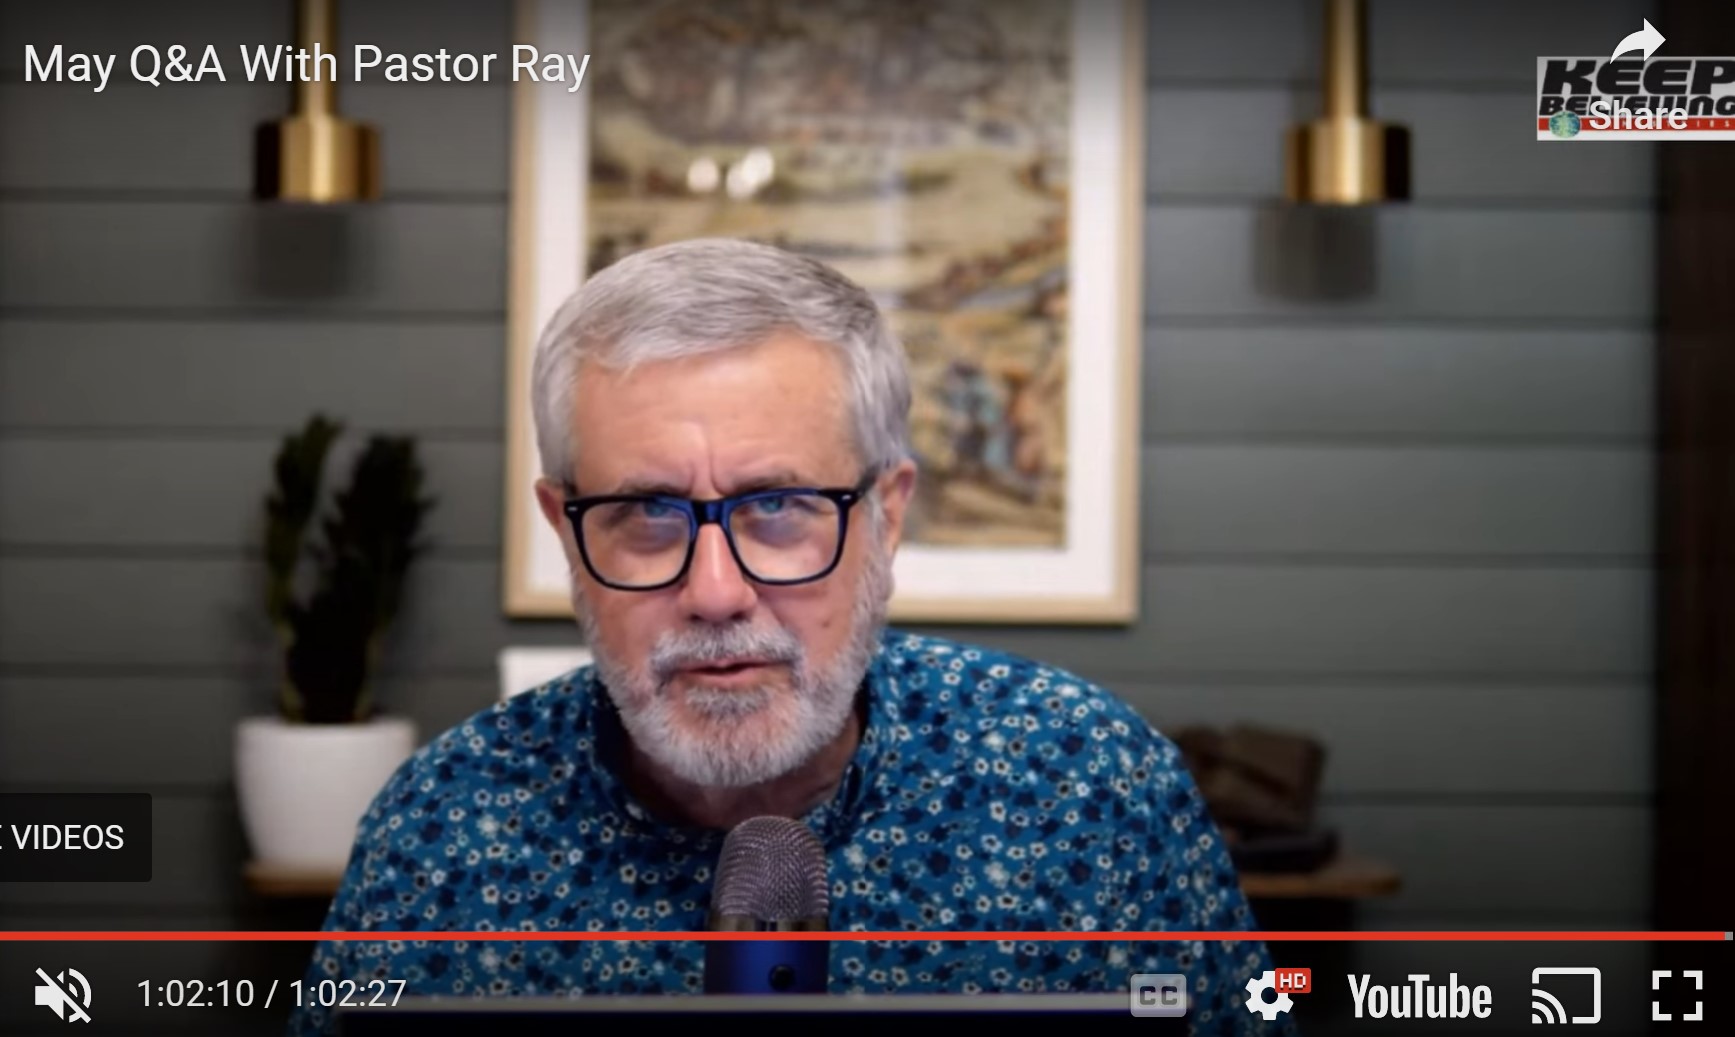 May Q&A With Pastor Ray